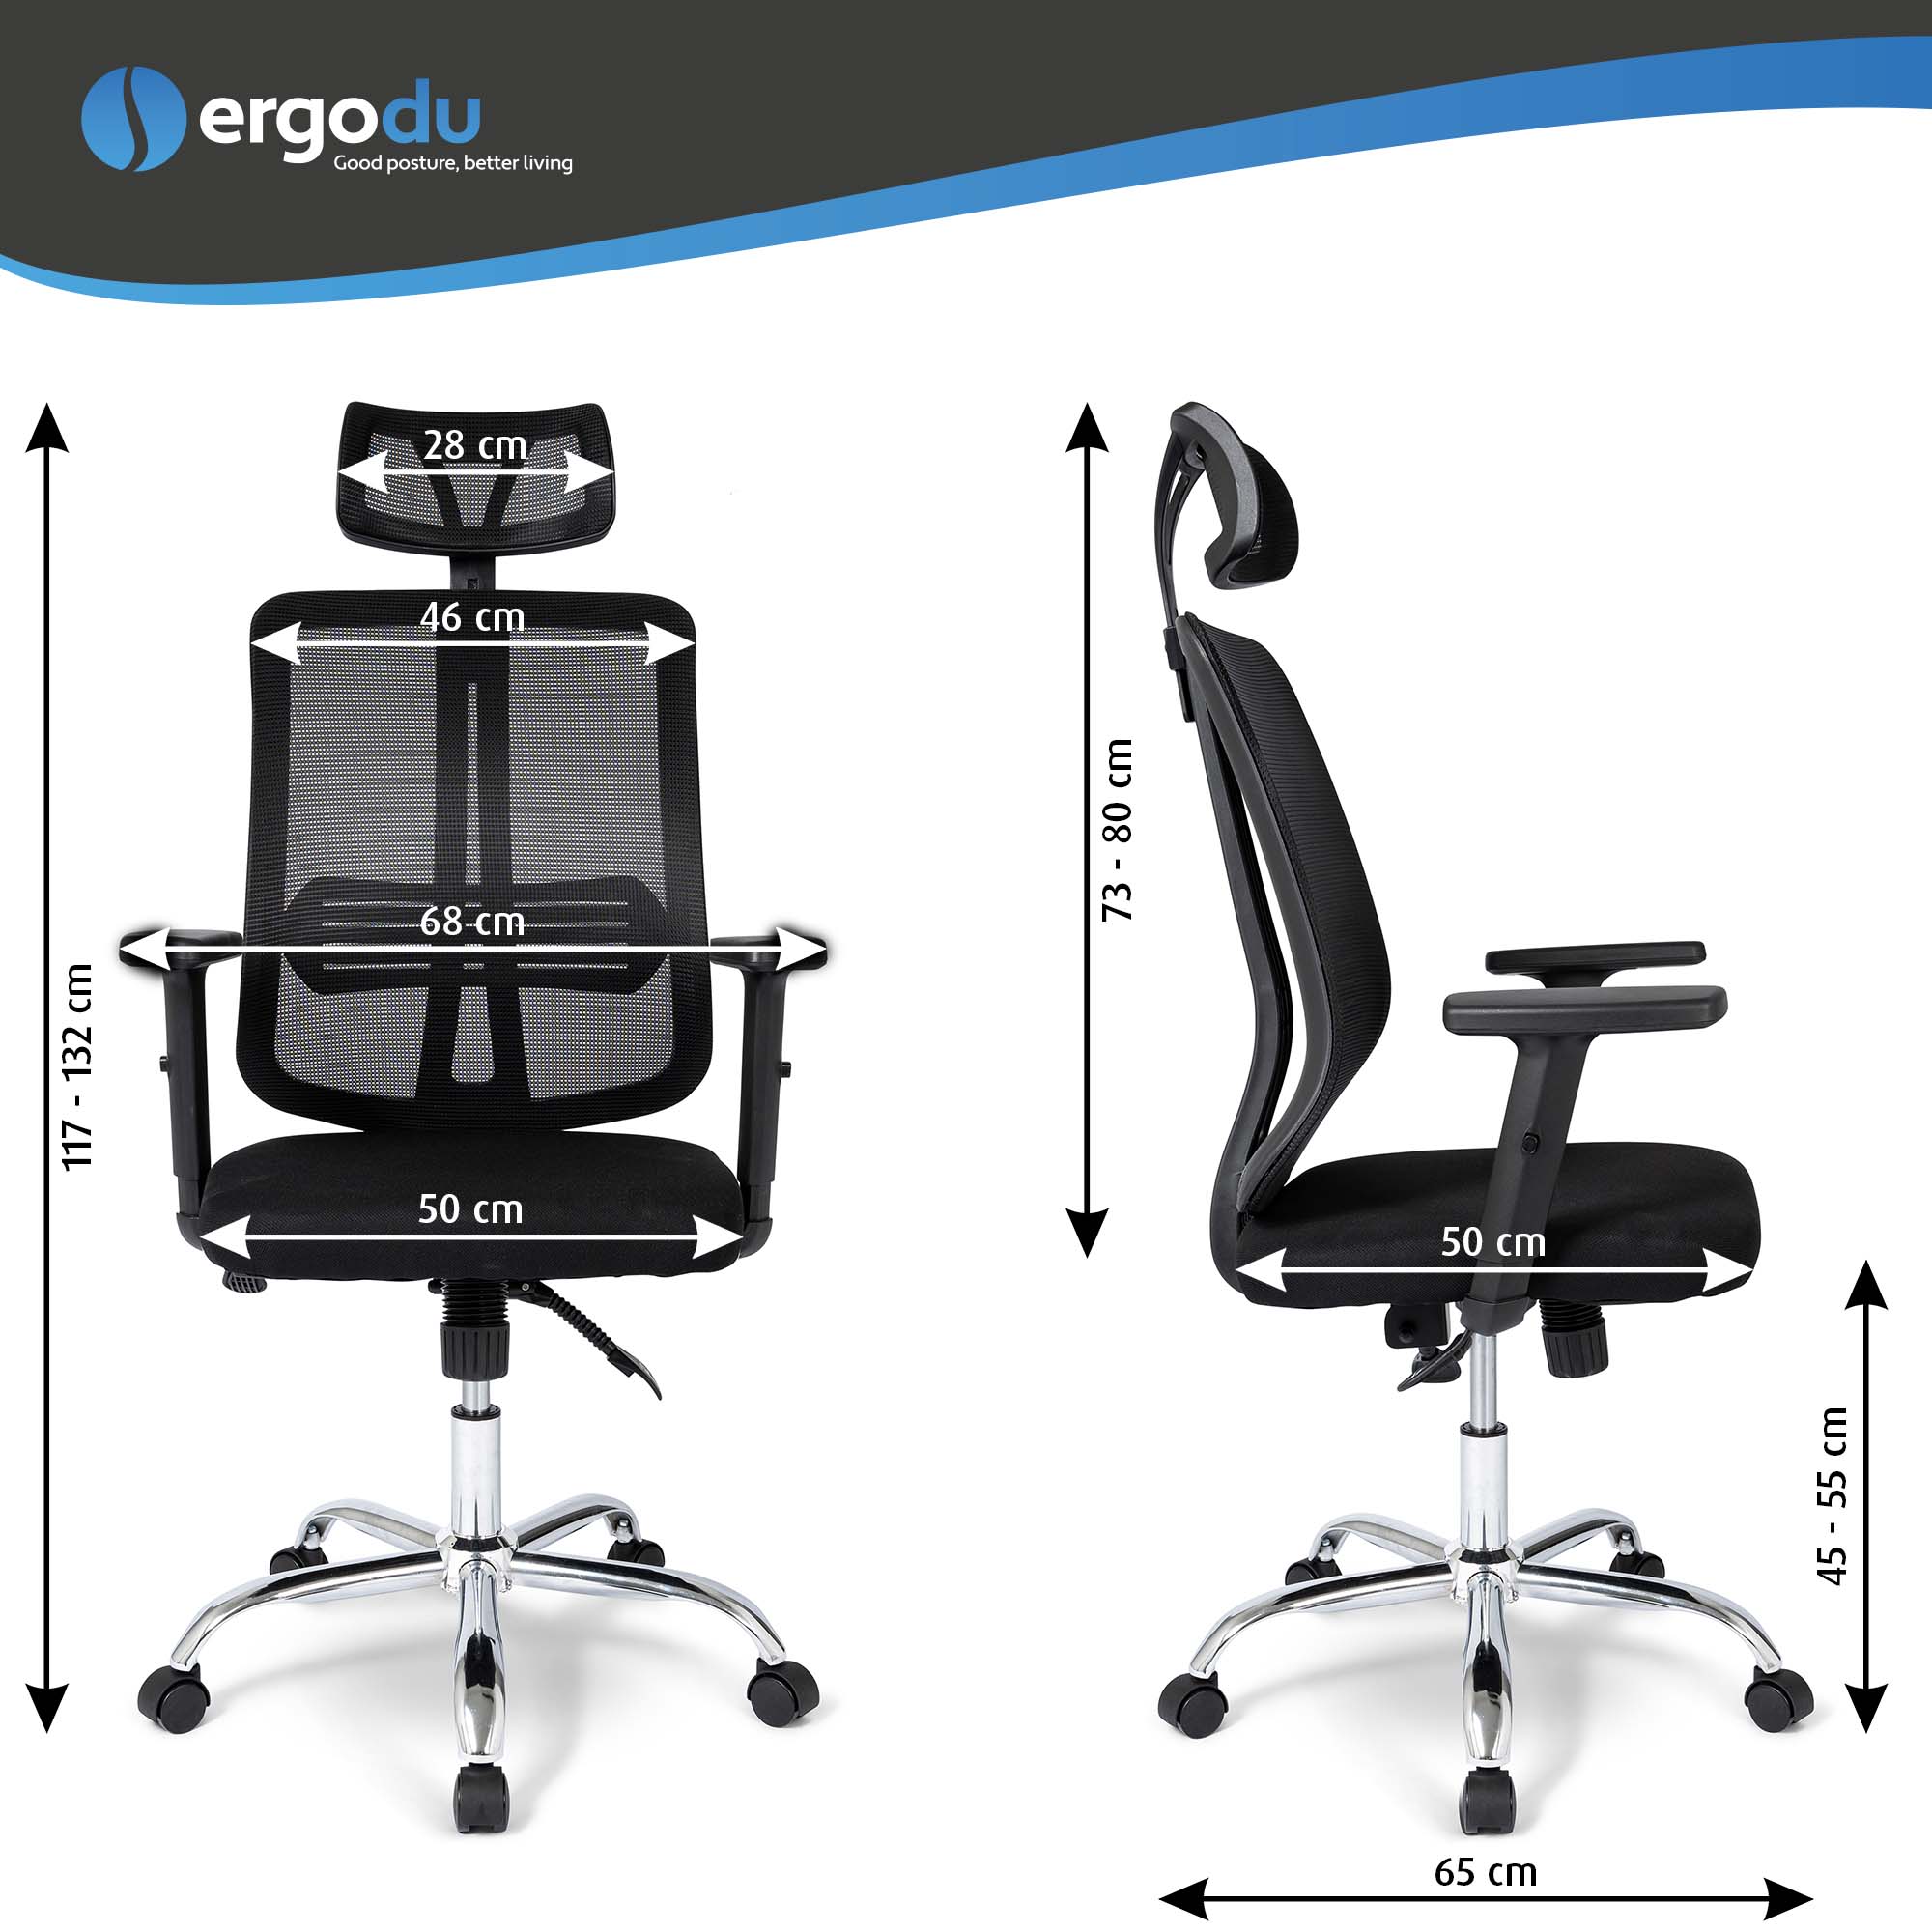 Ergodu Office Chair with Adjustable Armrests size chart